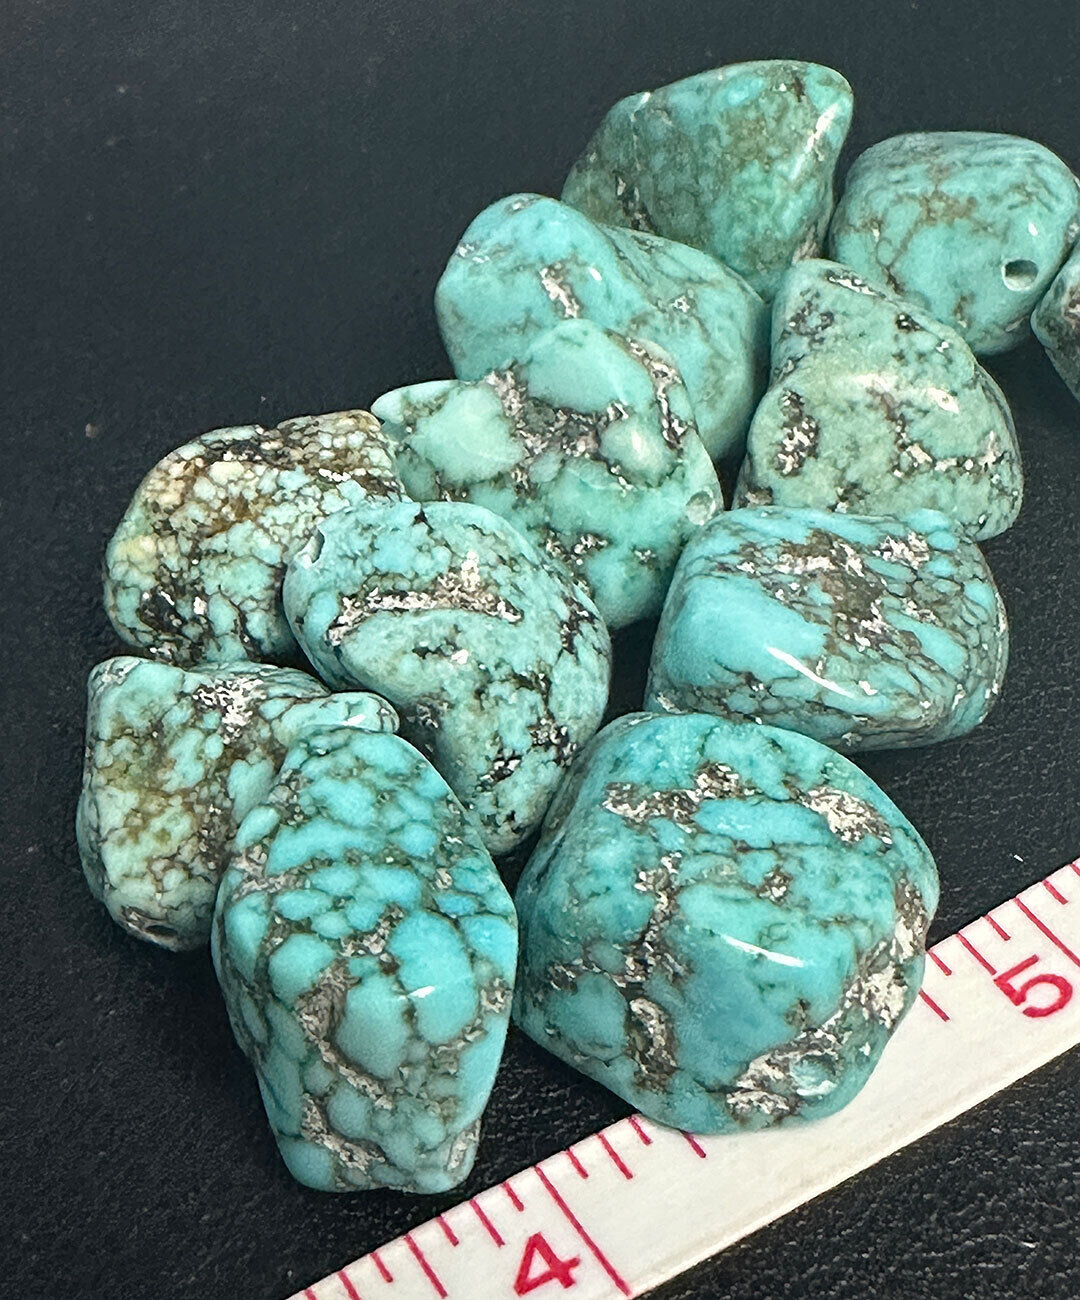 (3) Original Navajo Indian Turquoise Trade Beads Nuggets 1800's